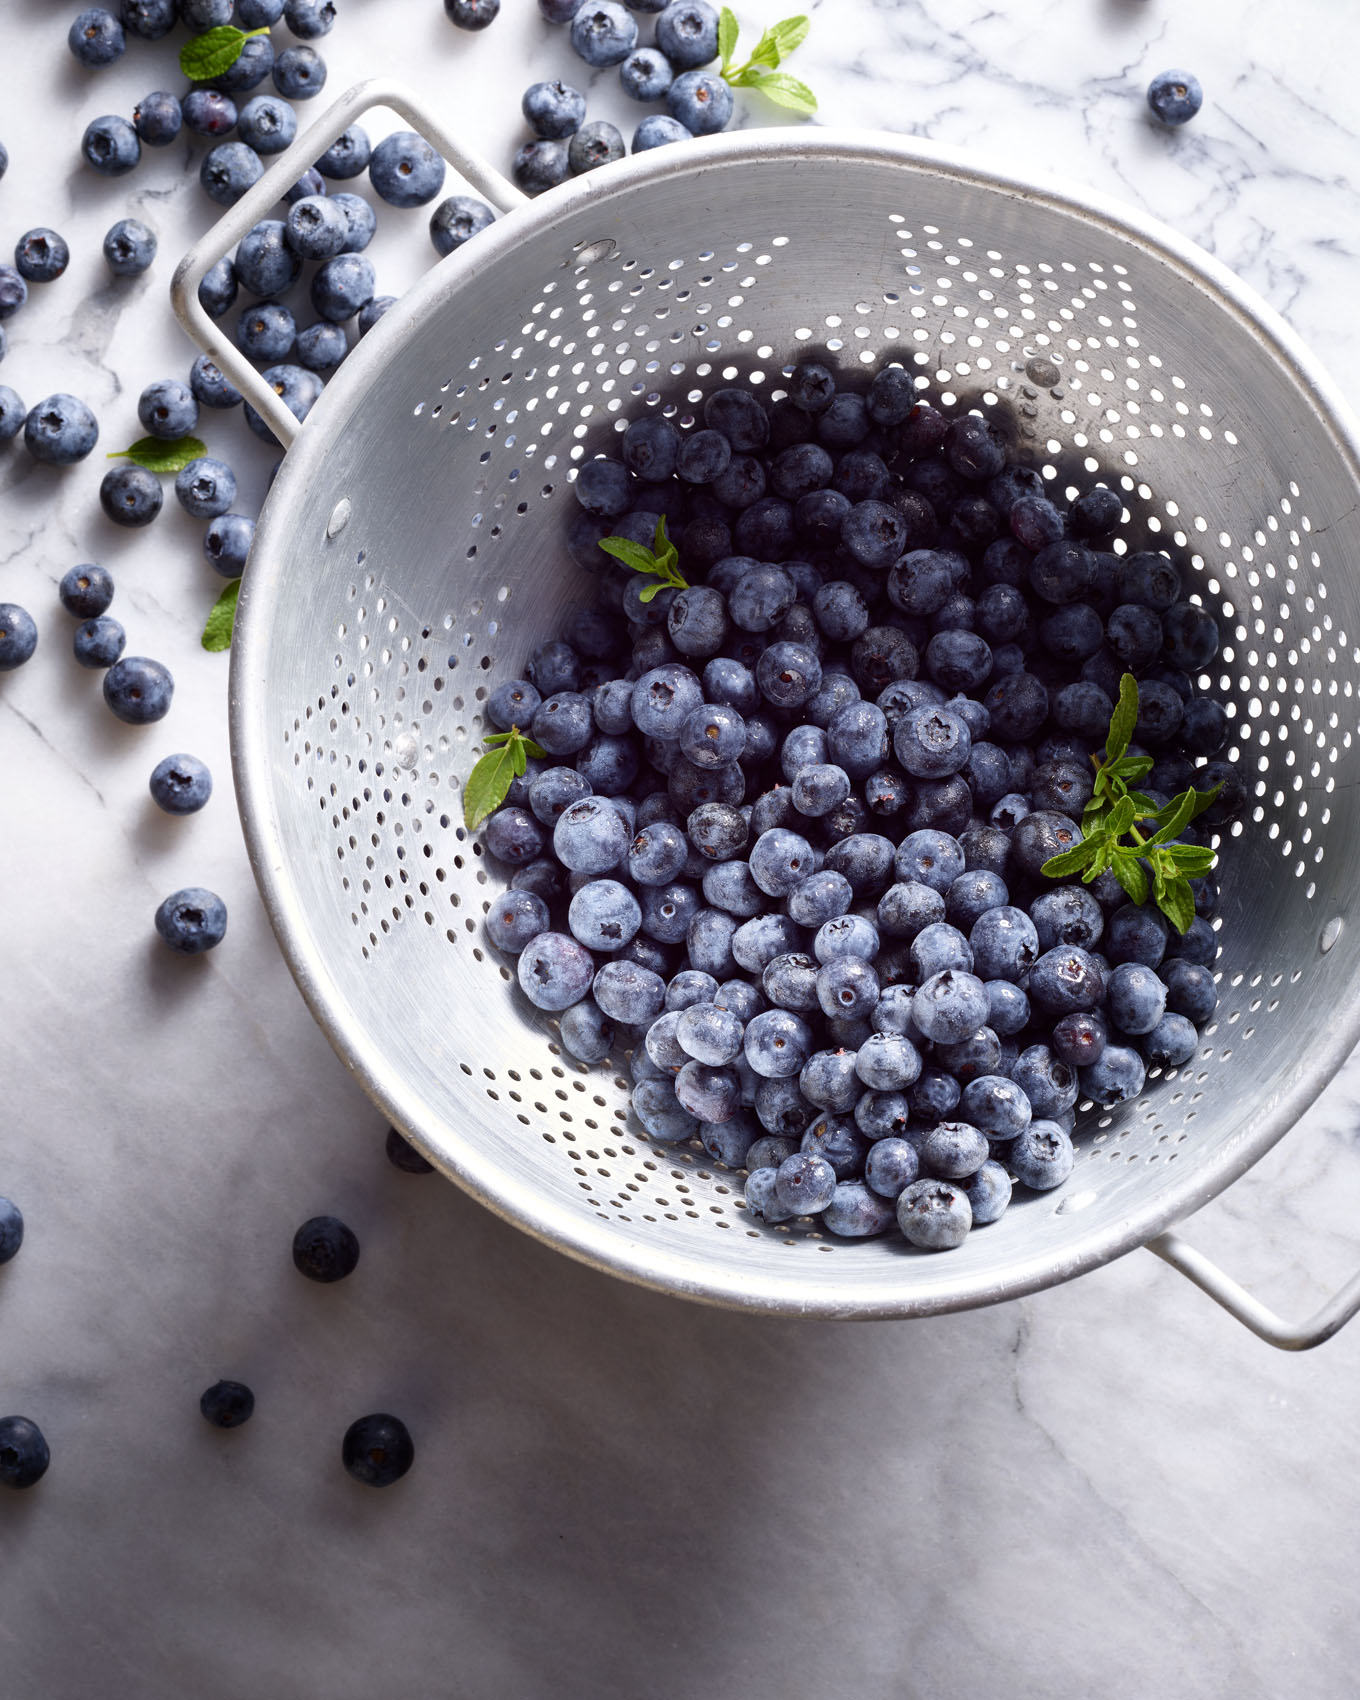 Produce-Blueberries0167